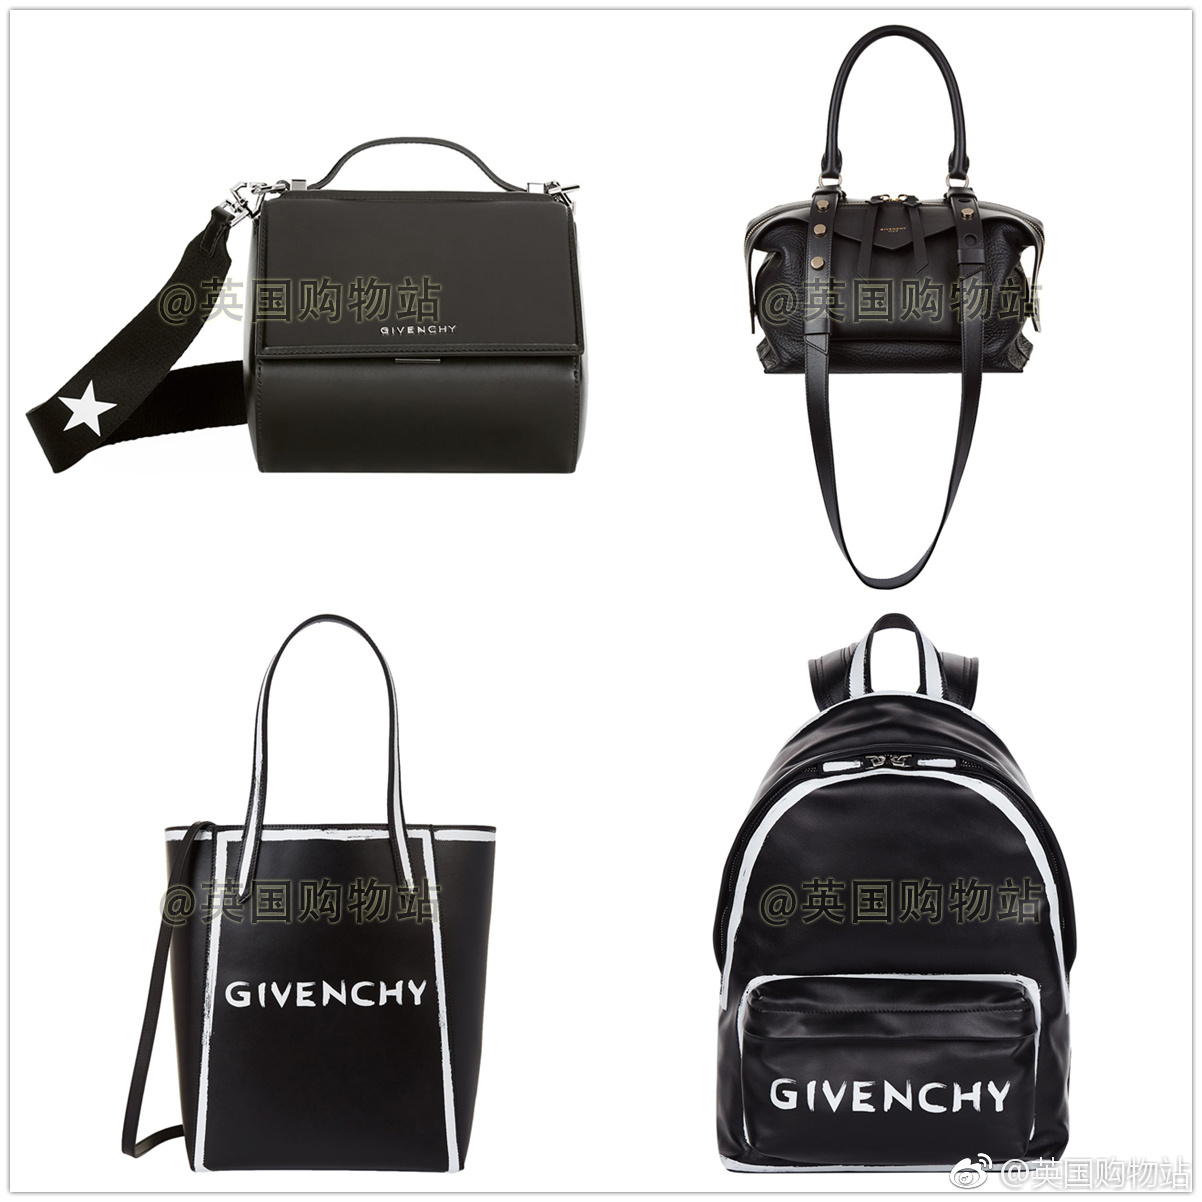 Harrods官网夏季Sale Preview，Givenchy纪梵希30% OFF